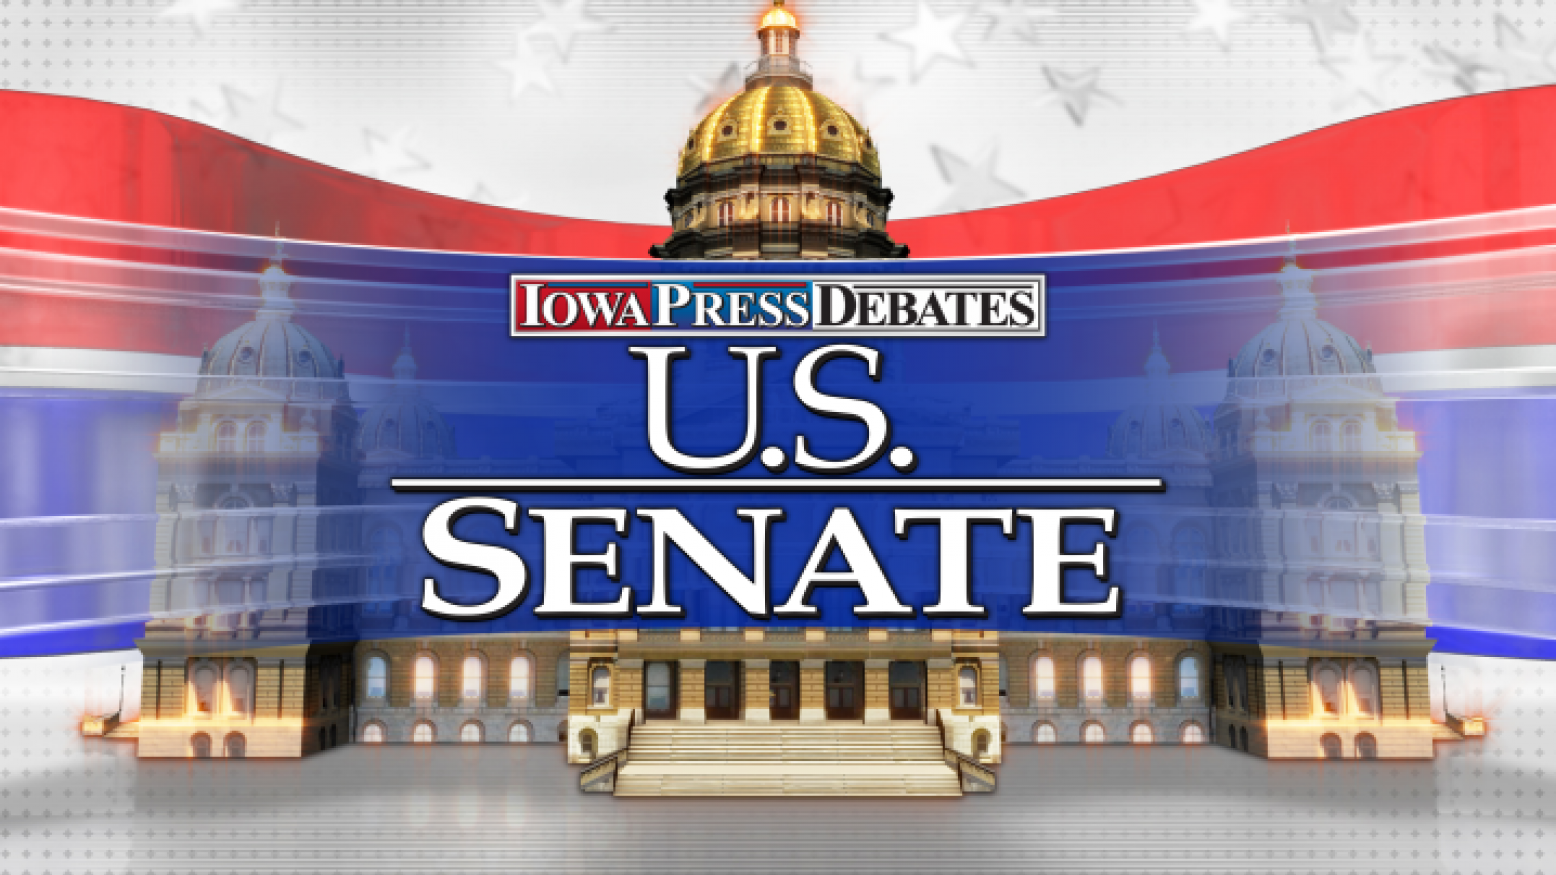 An illustration of the Iowa Capitol with a background of red, white and blue. In front of the Capitol is the logo for Iowa Press Debates: U.S. Senate.